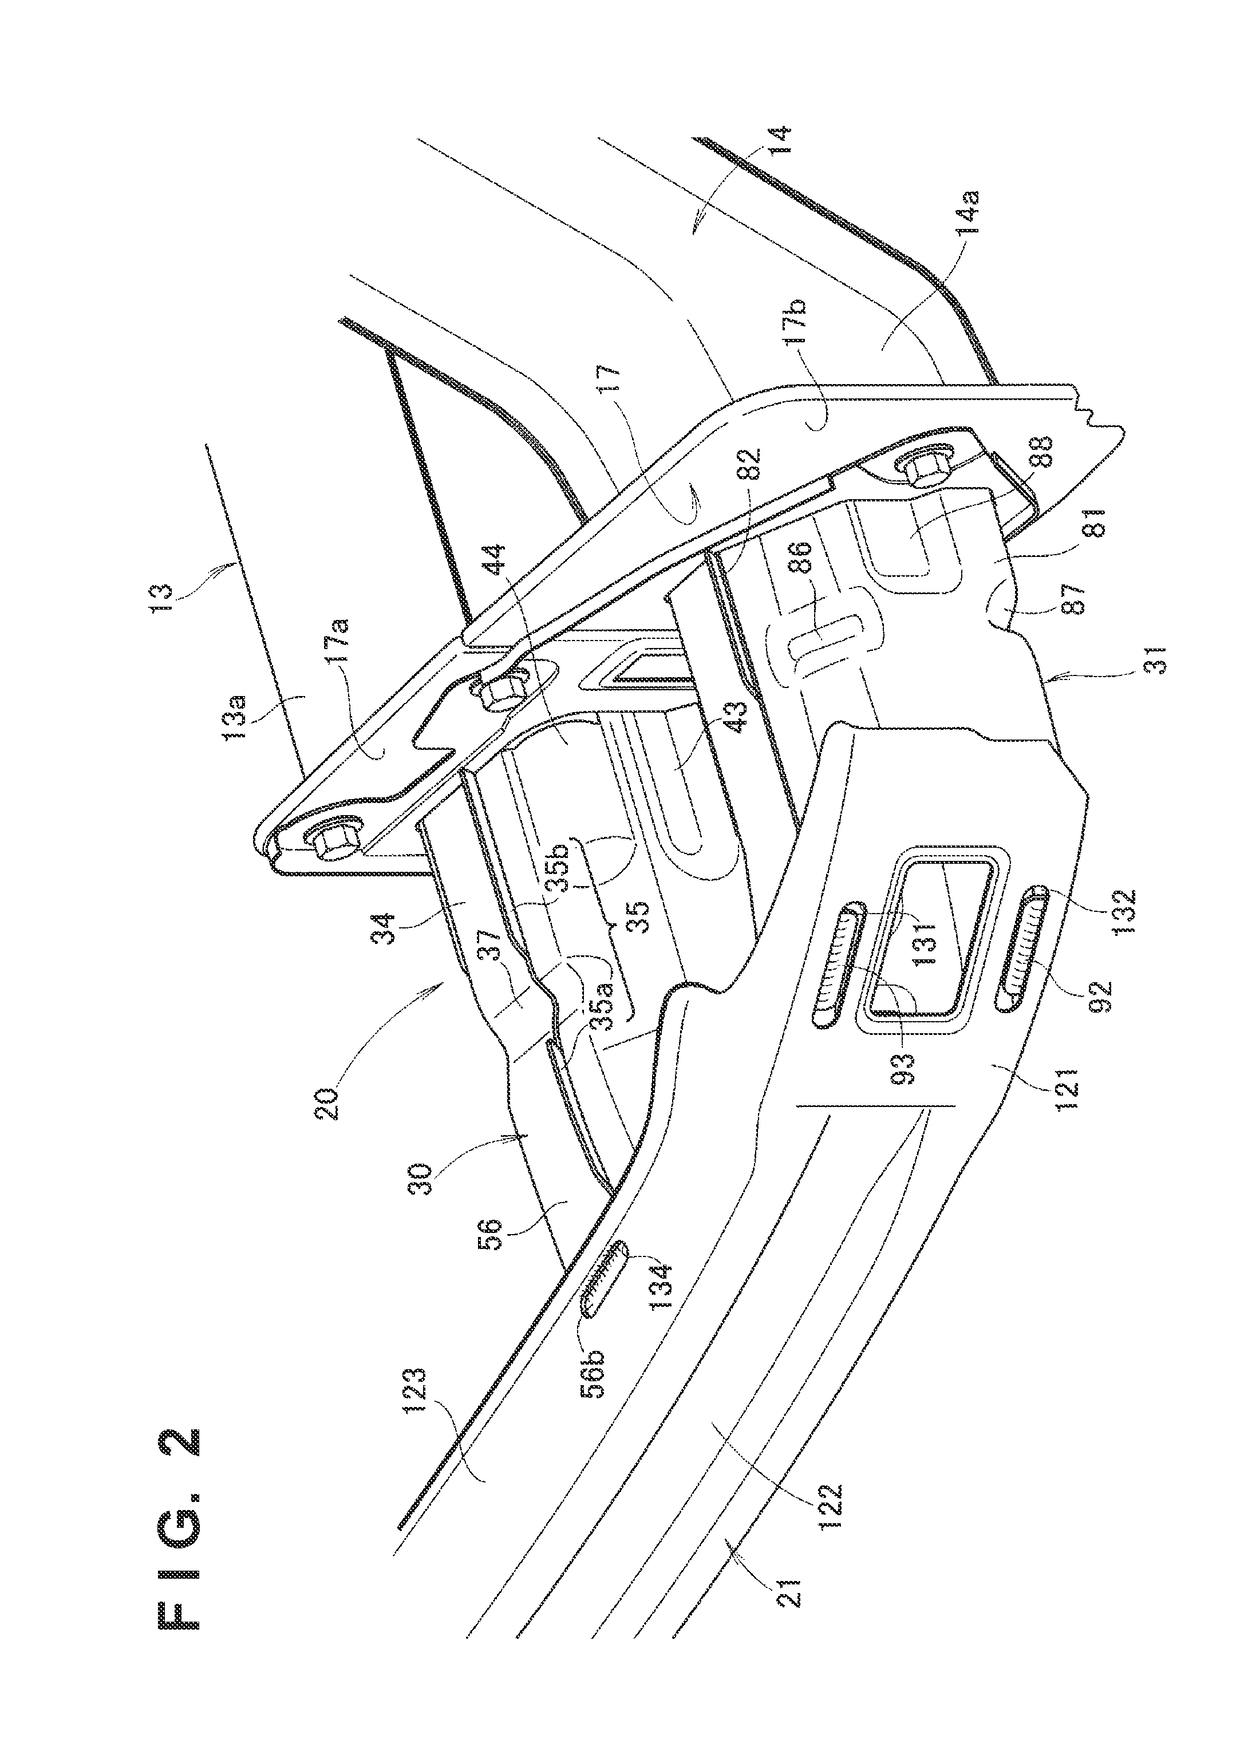 Vehicle body structure with impact absorbing part